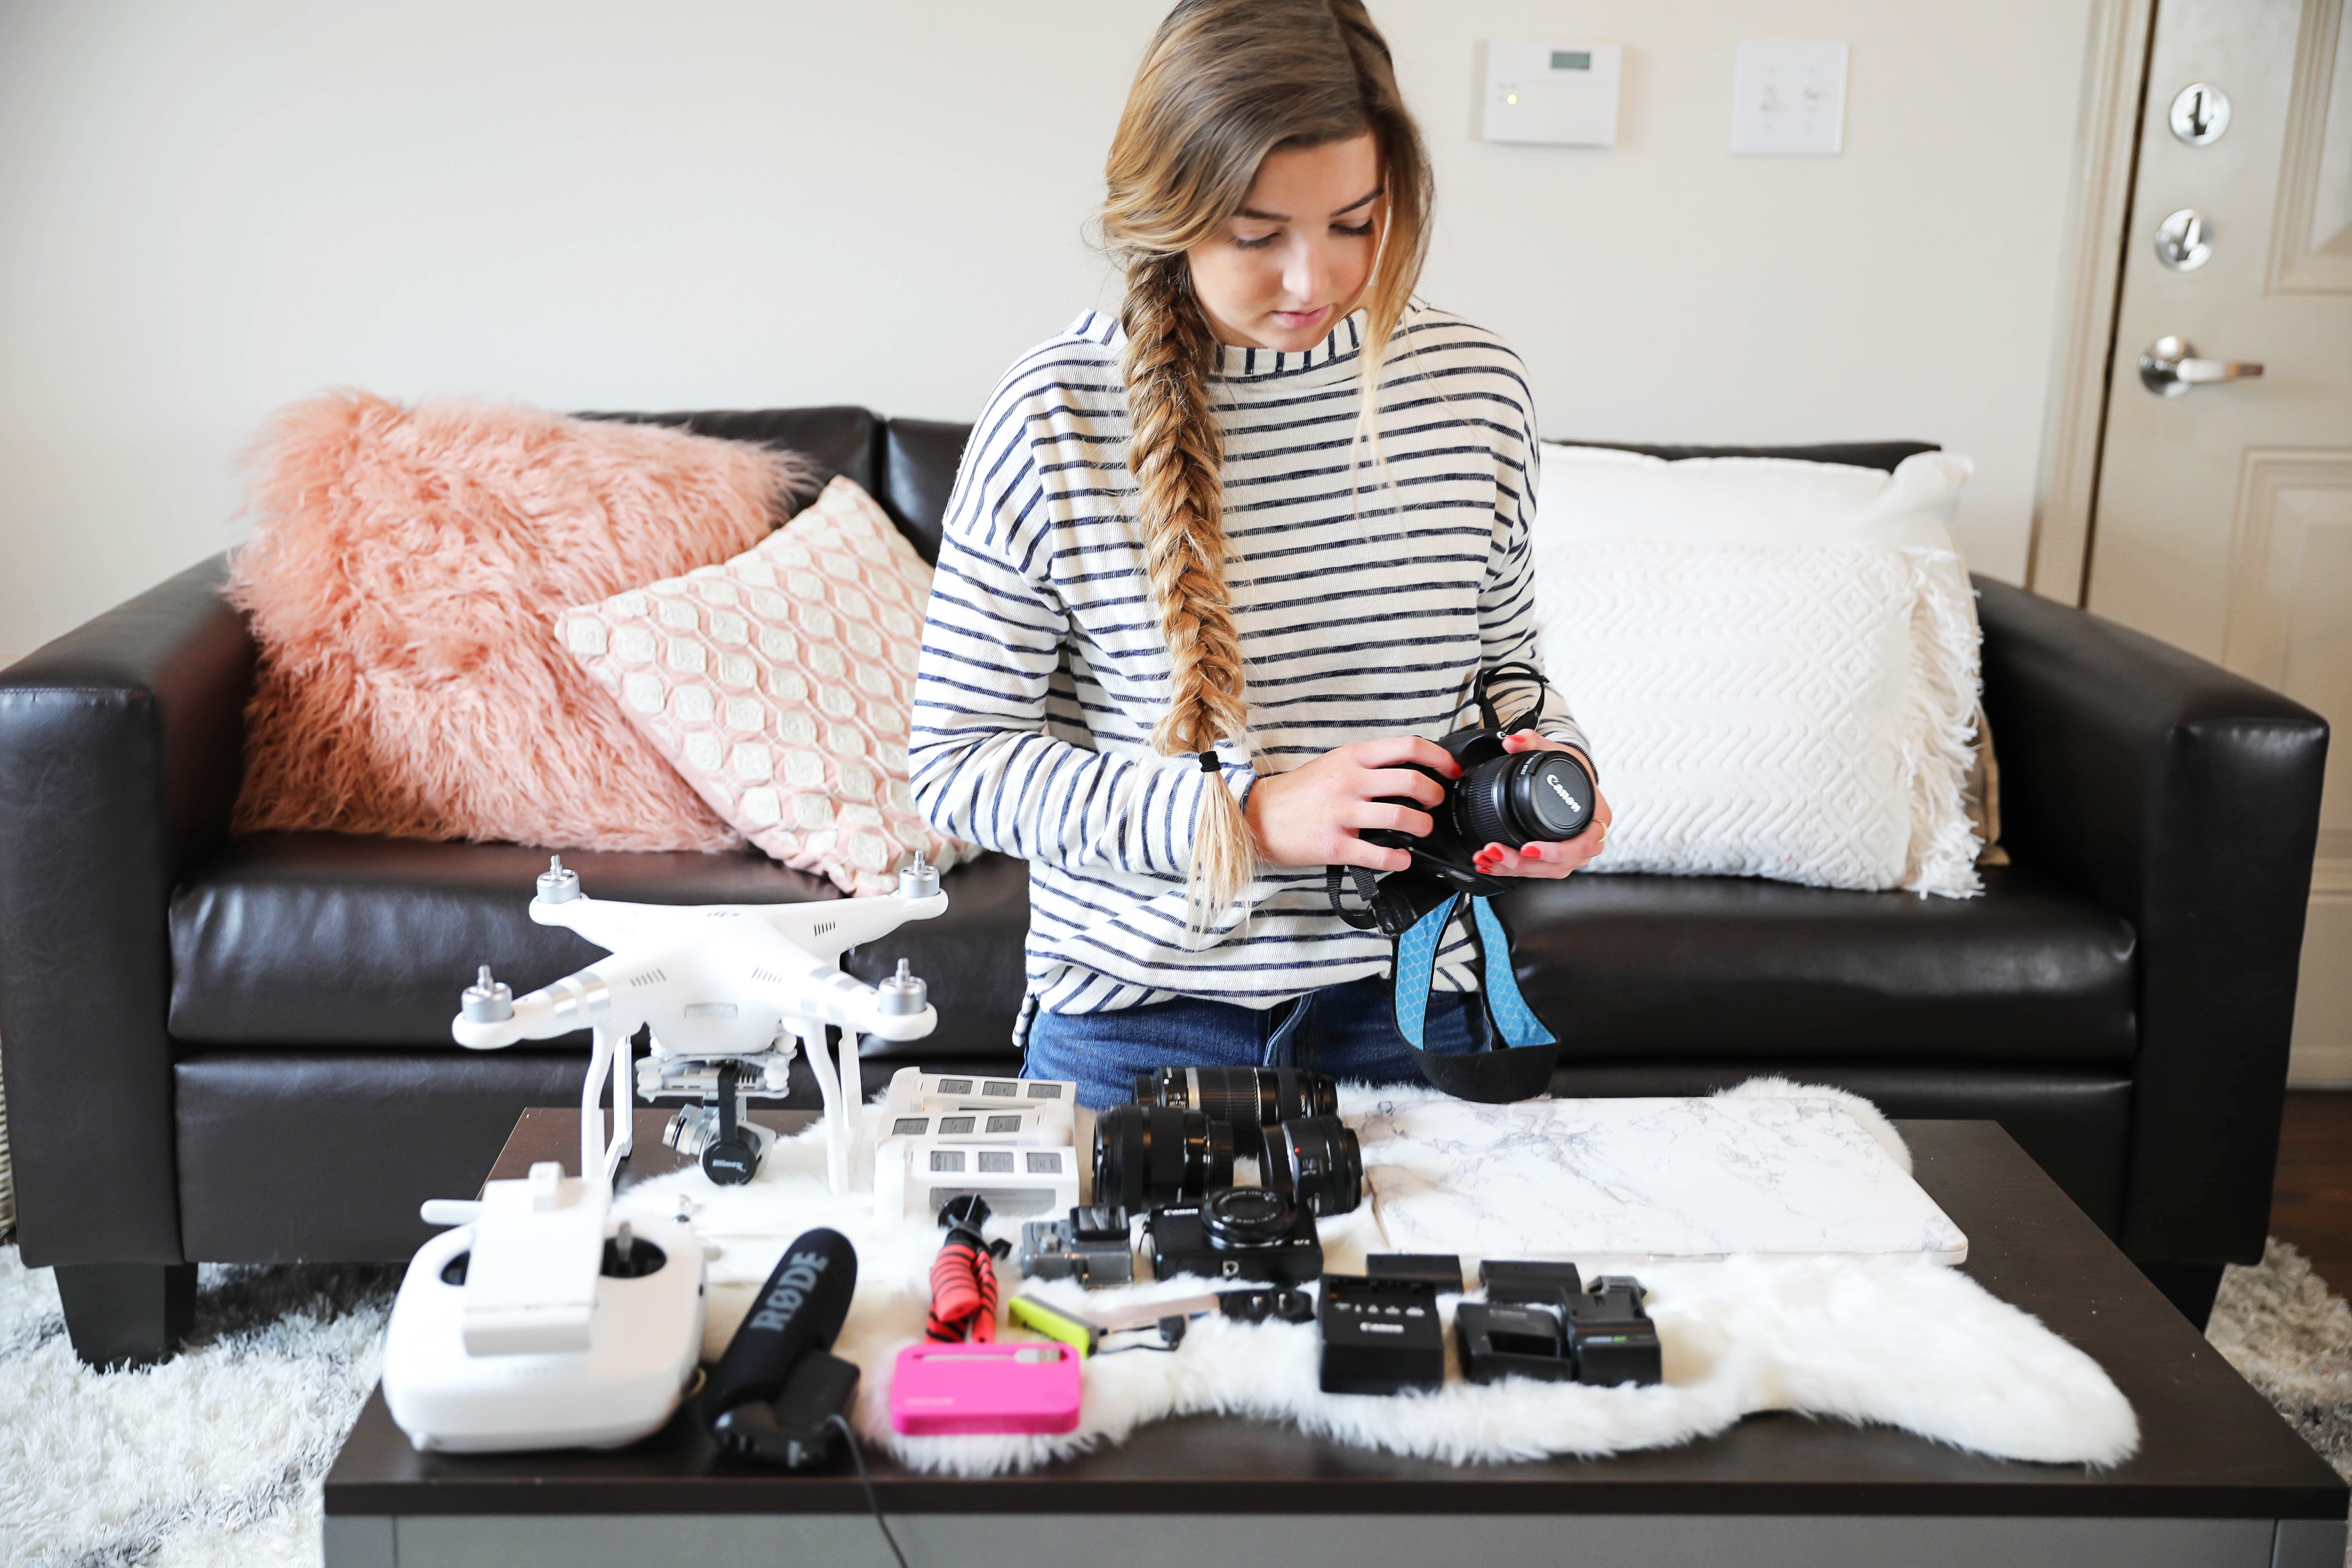 What's In My Camera Bag! As a blogger, one of the most important parts of creating contents is beautiful photos and videos! I love researching camera gear and I have collected quite a bit. Canon 5D Mark IV and accessories! By Lauren Lindmark on dailydoseofcharm.com daily dose of charm